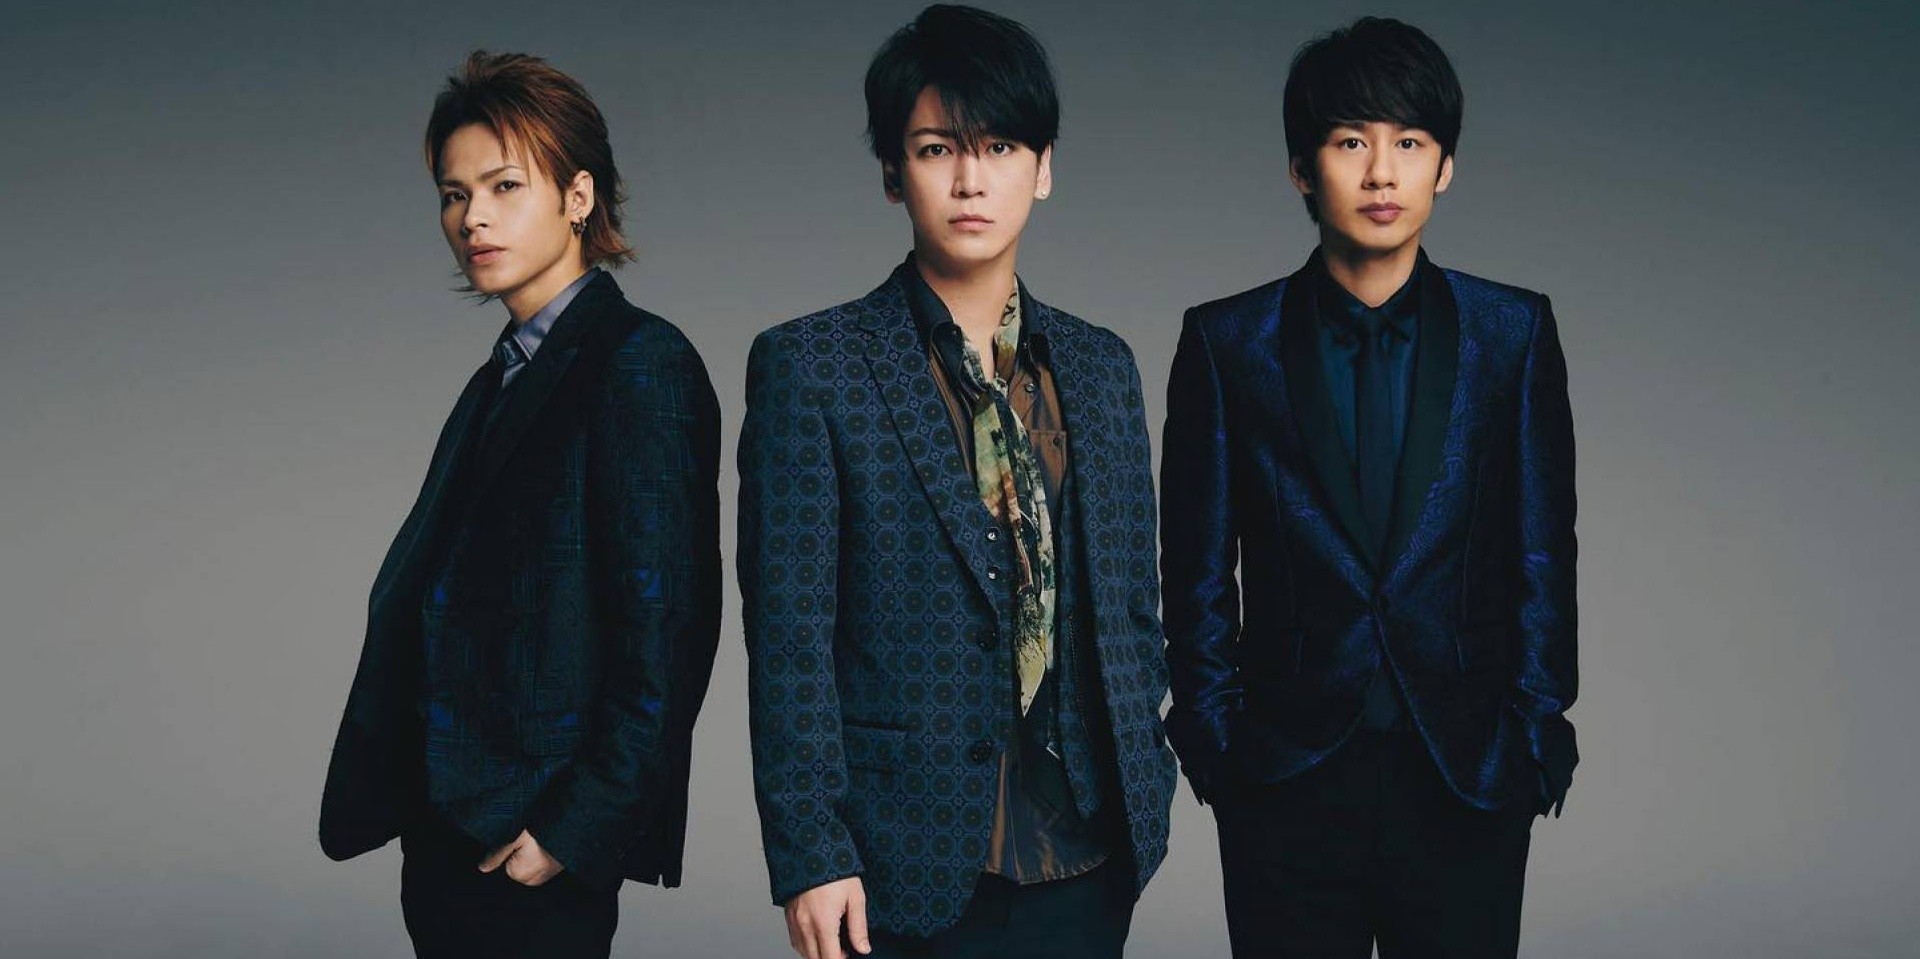 J-pop act KAT-TUN to celebrate 15th anniversary with concert series and online show